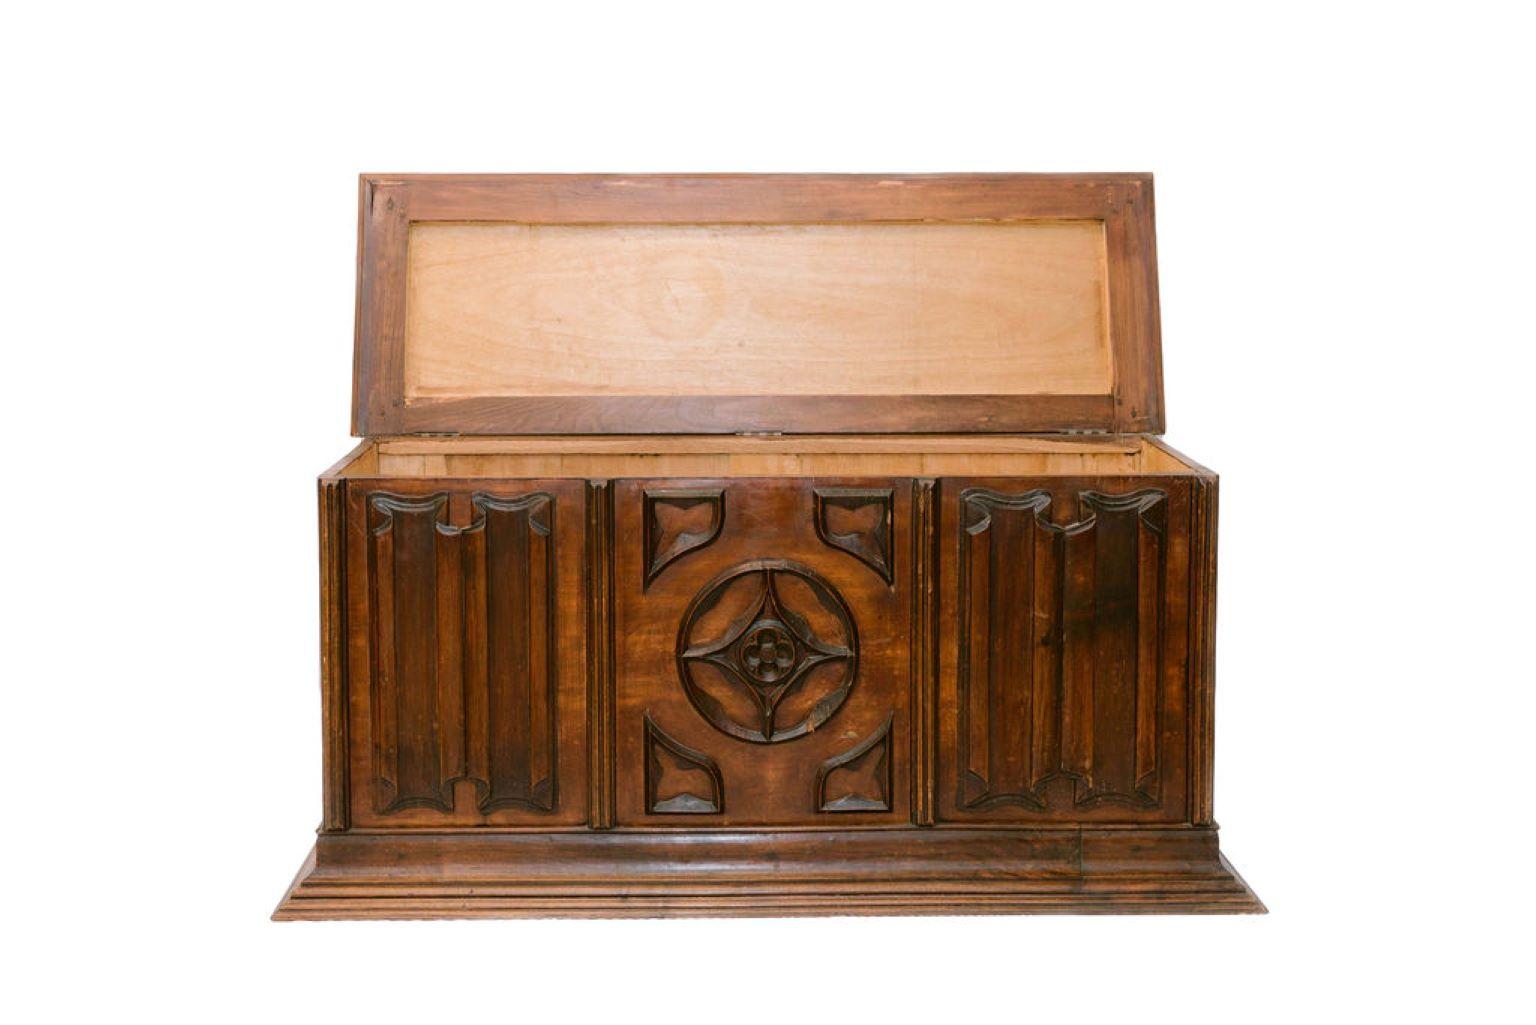 French carved Mahogany coffer, applied carved center panel with medallion, relief linenfold carved panels, fielded panel sides, and a graduated step base.